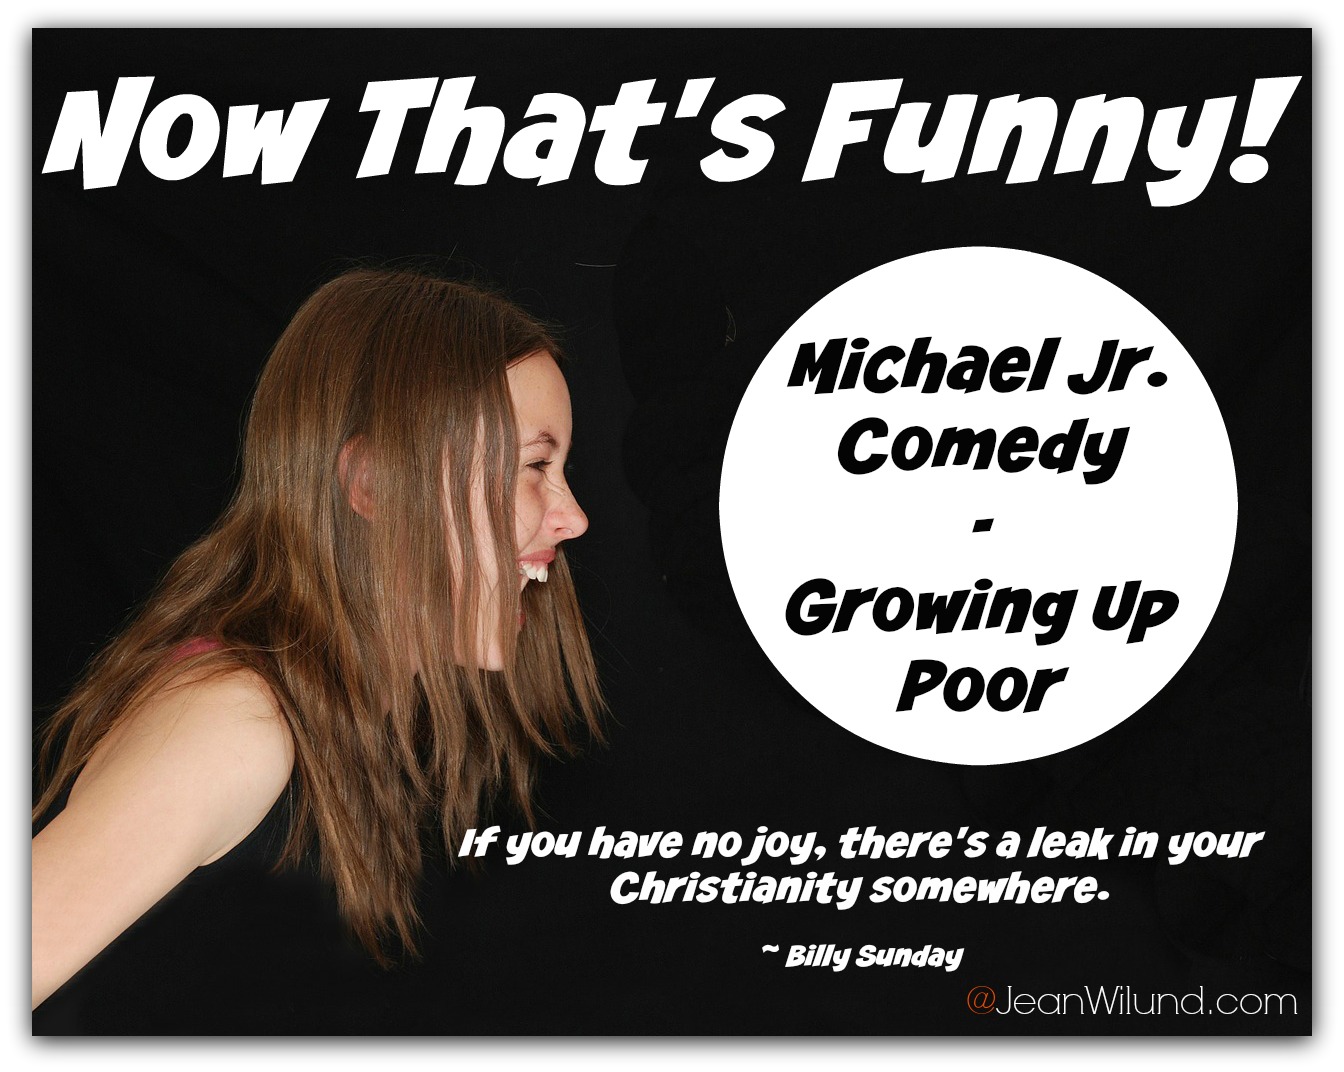 Now That's Funny! If you have no joy, there's a leak in your Christianity somewhere. Plug your leak with a laugh: Michael Jr. Comedy in "Growing Up Poor"